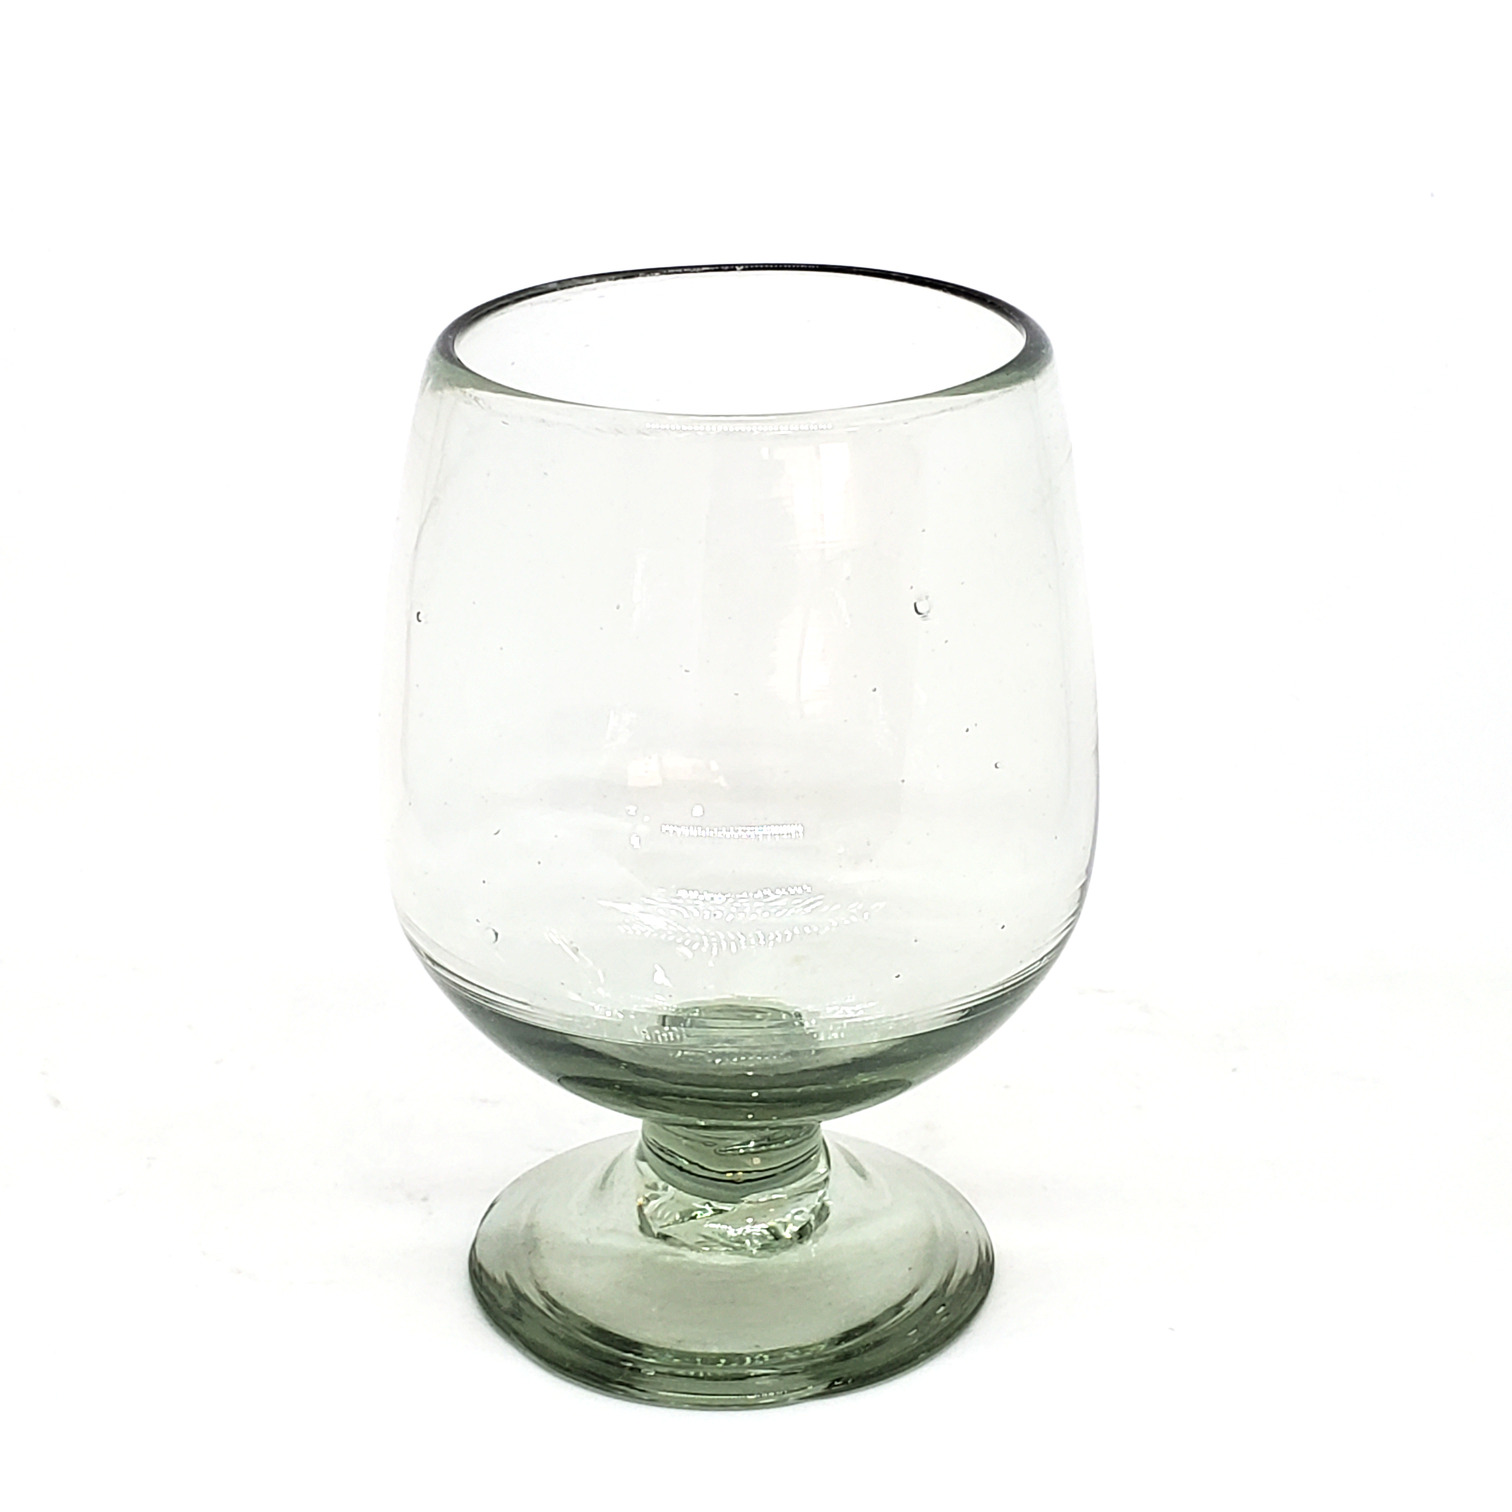 Wholesale Clear Glassware / Clear Large Cognac Glasses  / A modern touch for one of the finest drinks, these balloon glasses are the contemporary version of a classic cognac snifter.